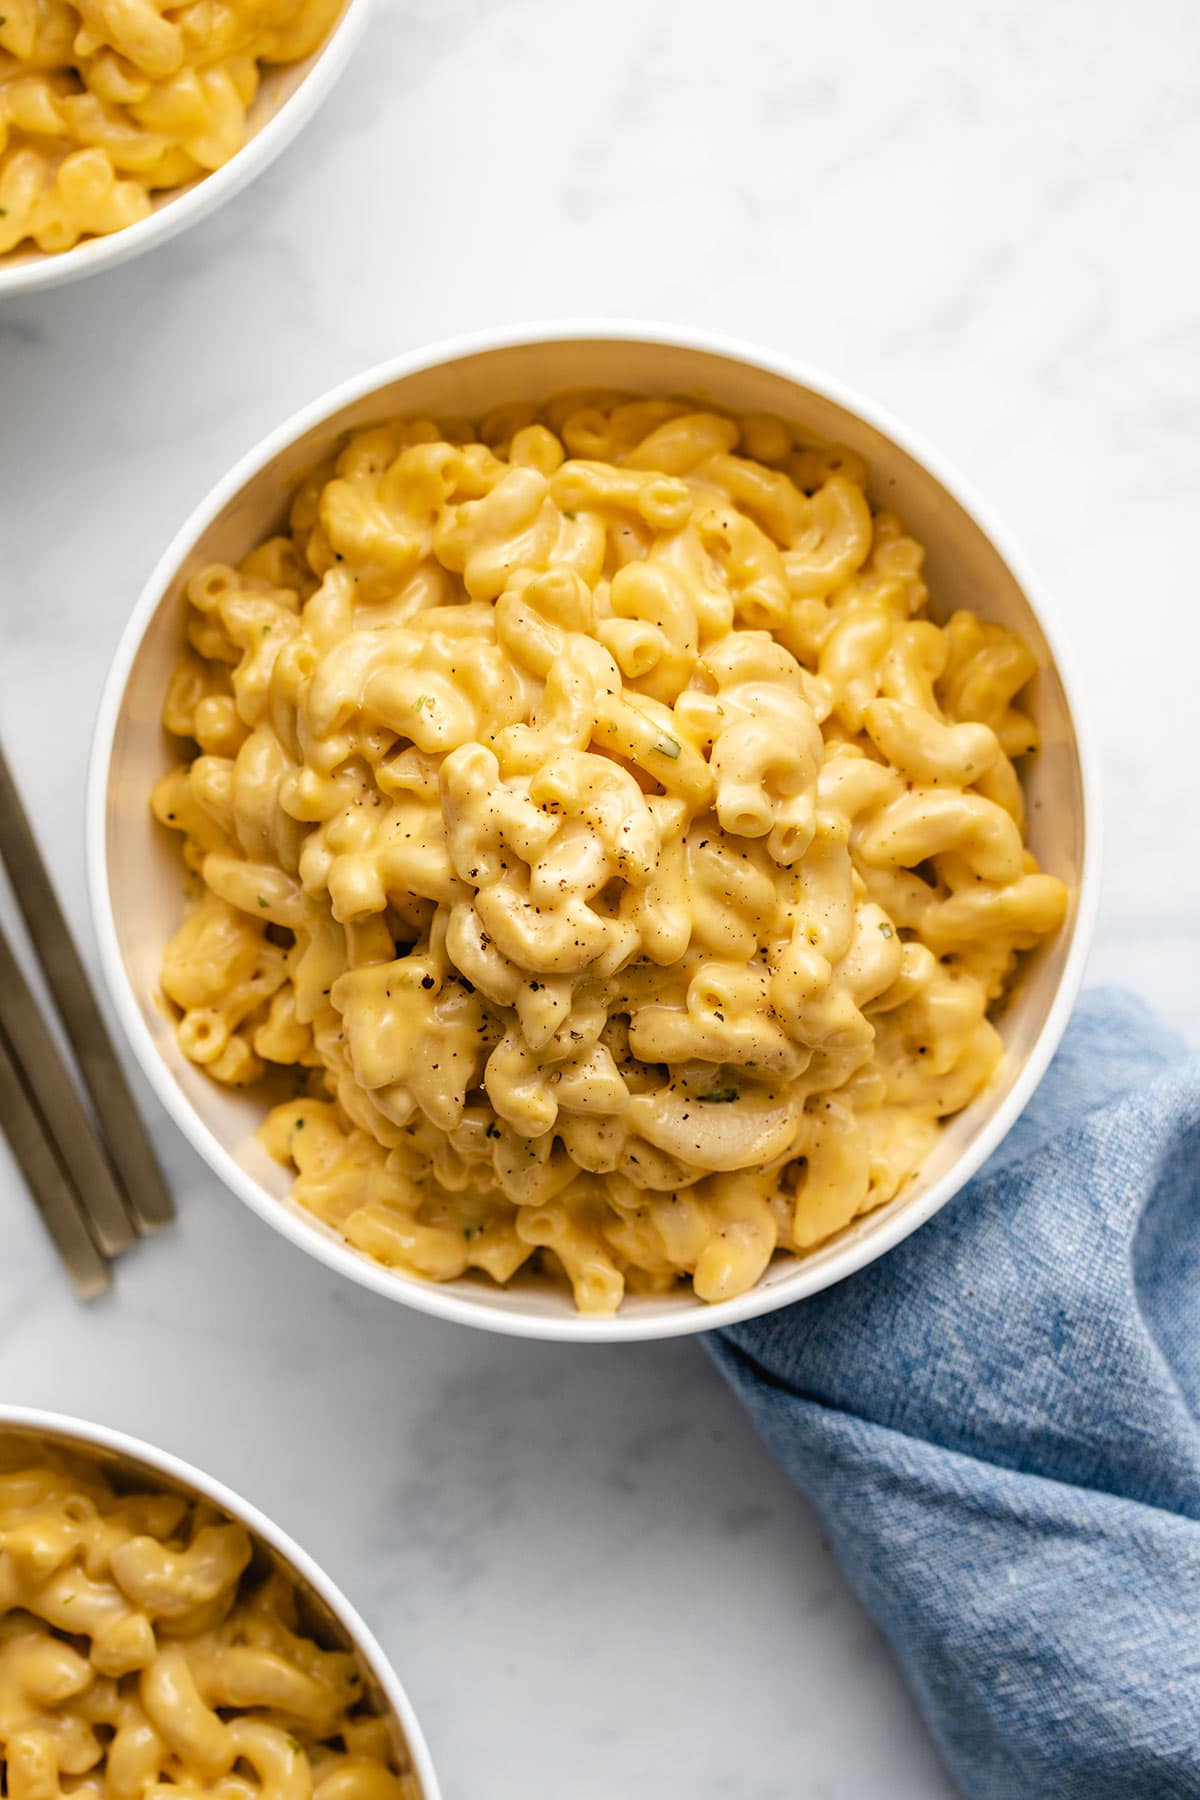 Instant Pot Macaroni and Cheese in a white bowl next to a blue linen.